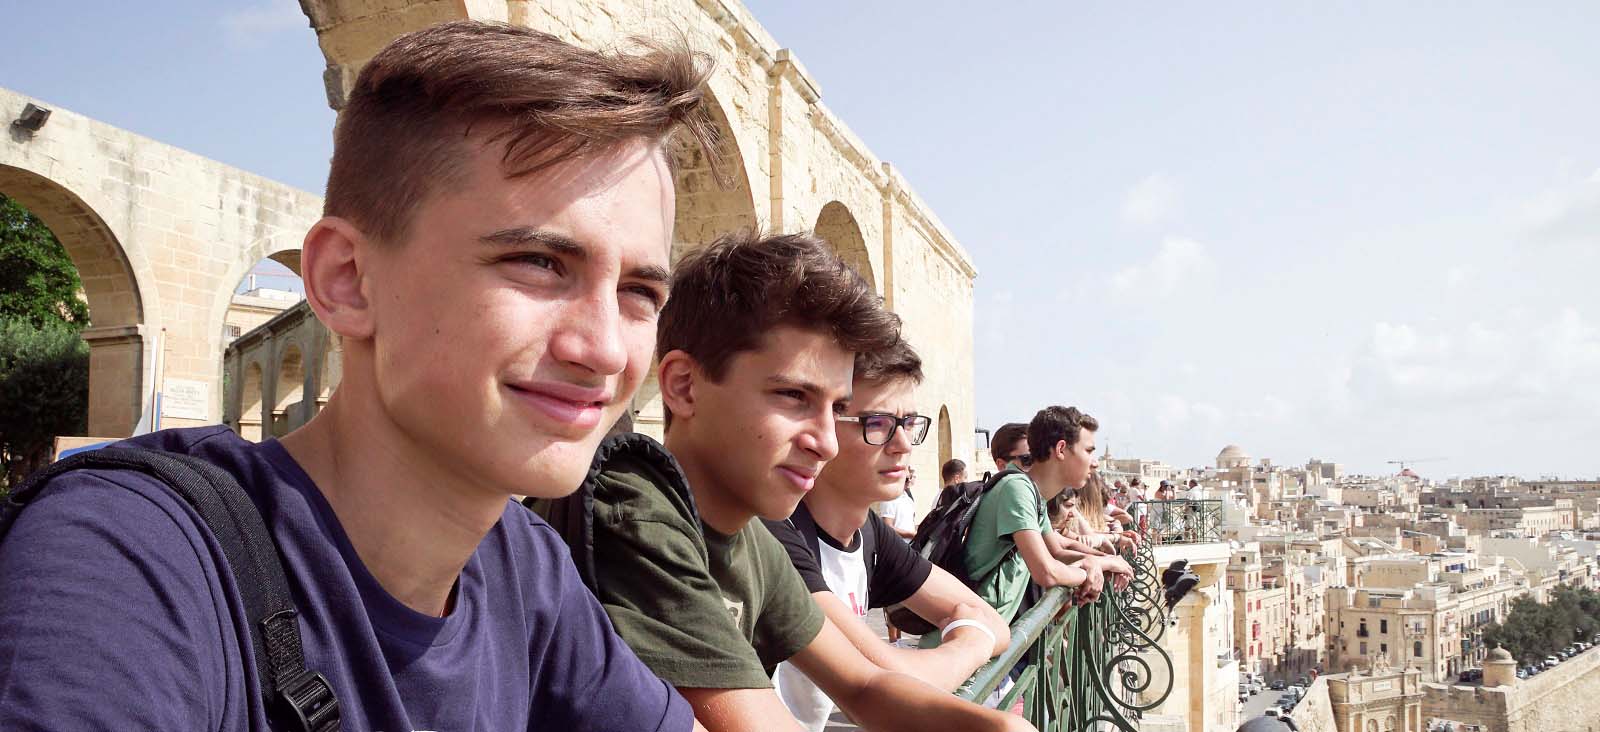 Students on a study holiday in Malta